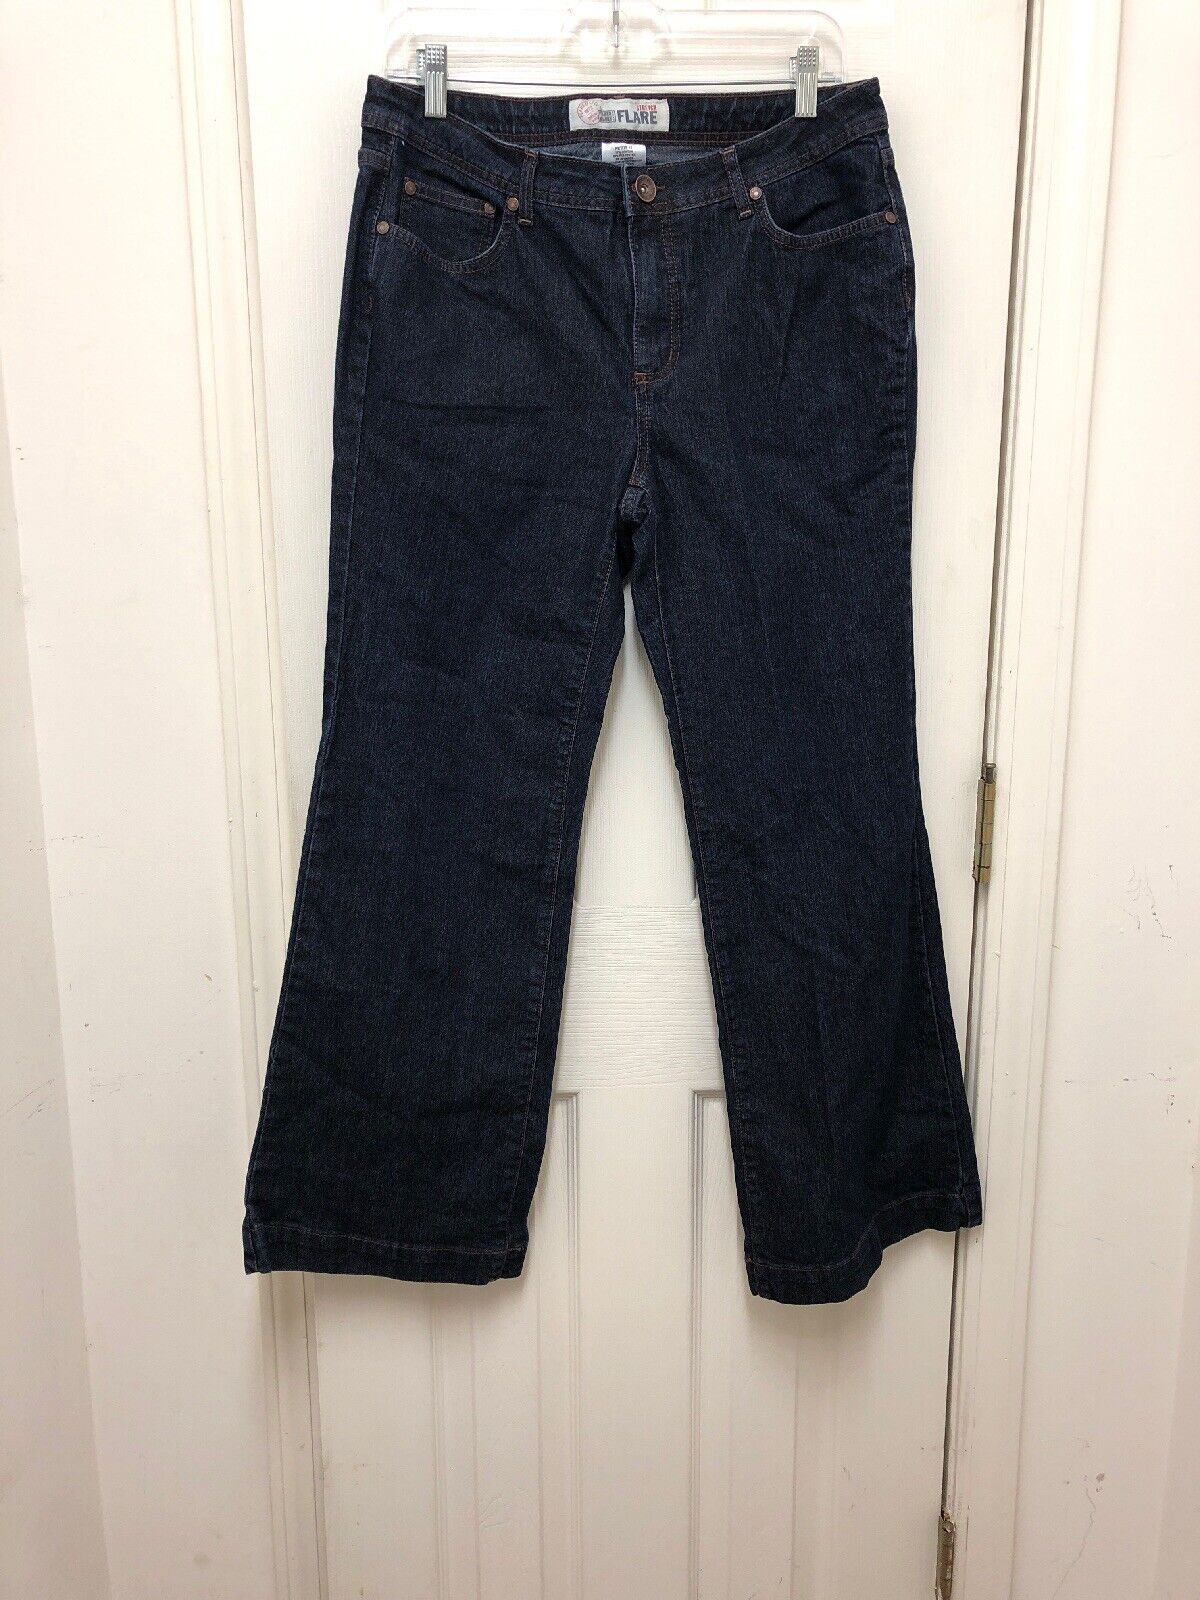 Faded Glory Womens Jeans/Size 12P/Dark Wash - image 3